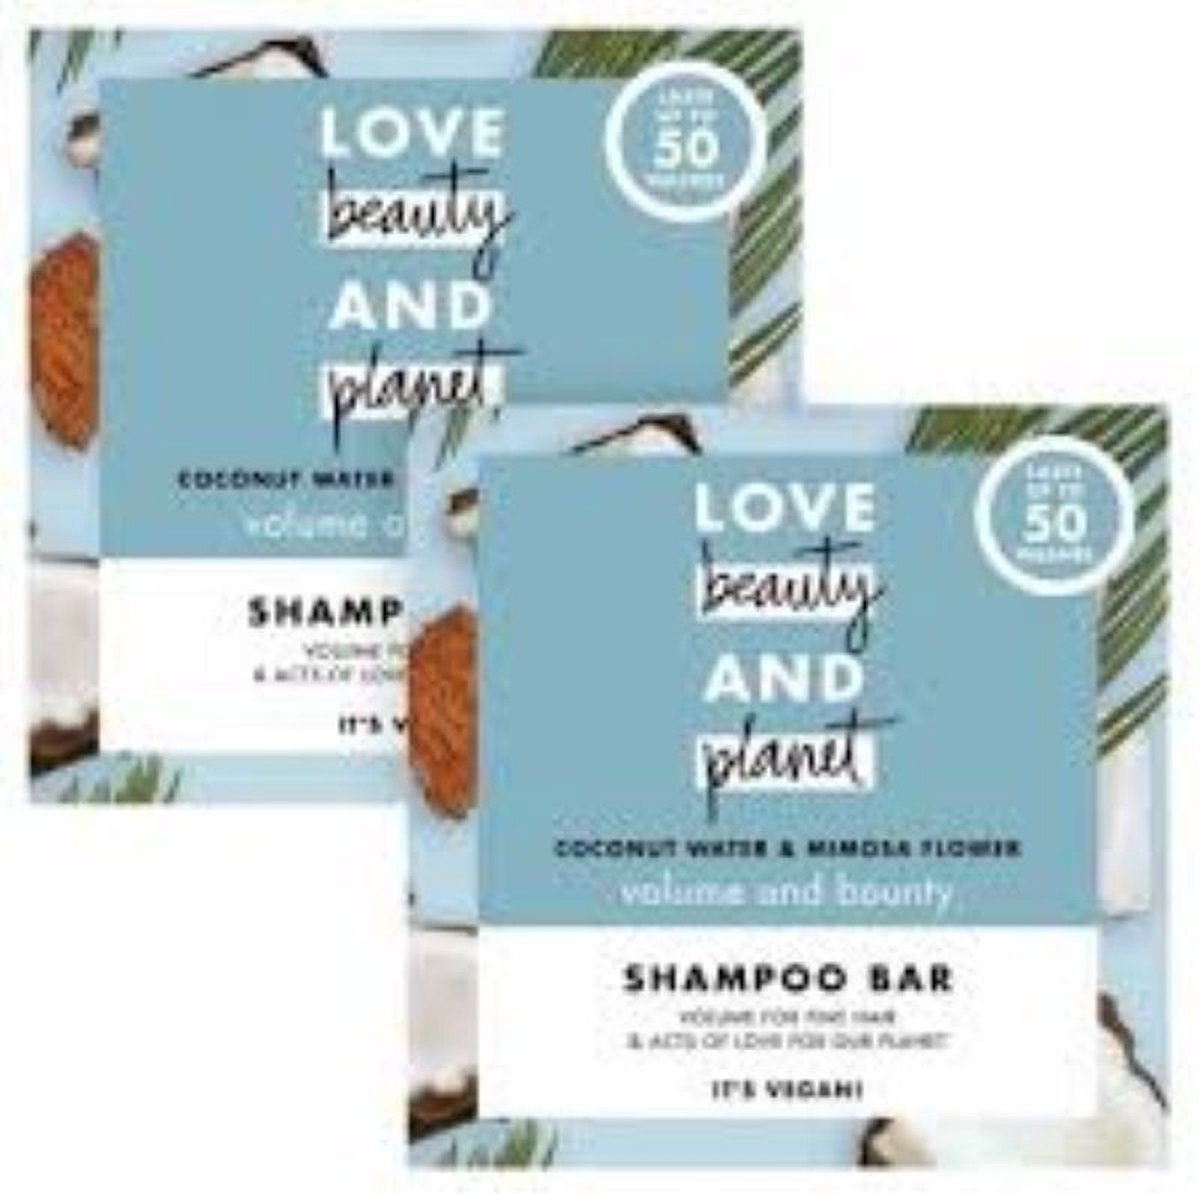 Love Beauty and Planet Shampoo Bar Coconut Water & Mimosa Flower - 2 x 90 gram